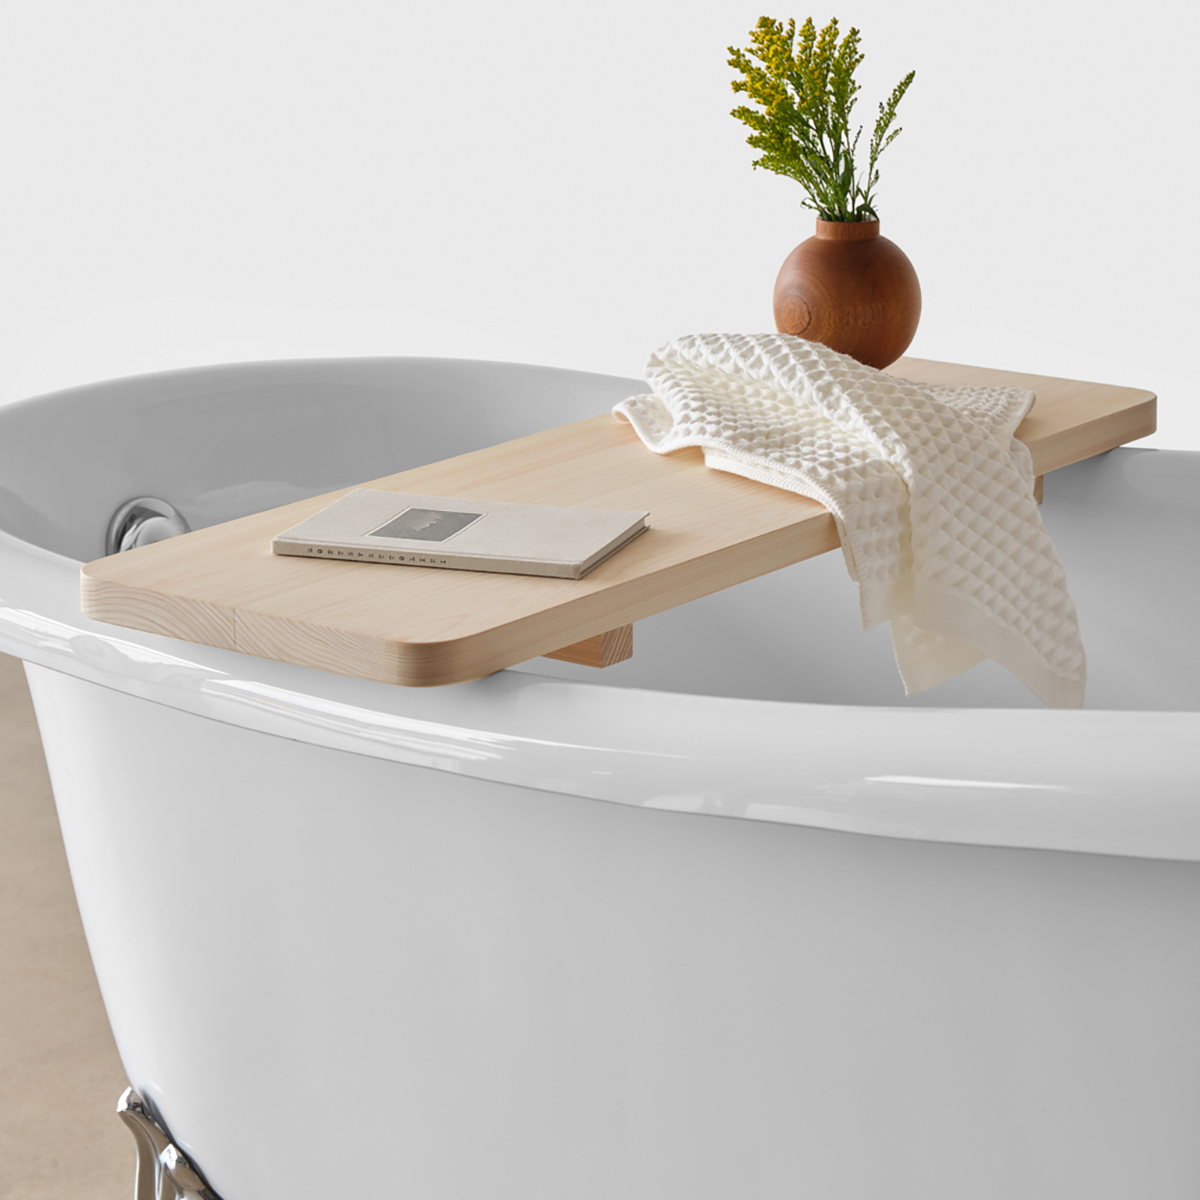 https://www.containerstore.com/catalogimages/503339/10096058-Hinoki_Wood_Bath_Caddy_2-ve.jpg